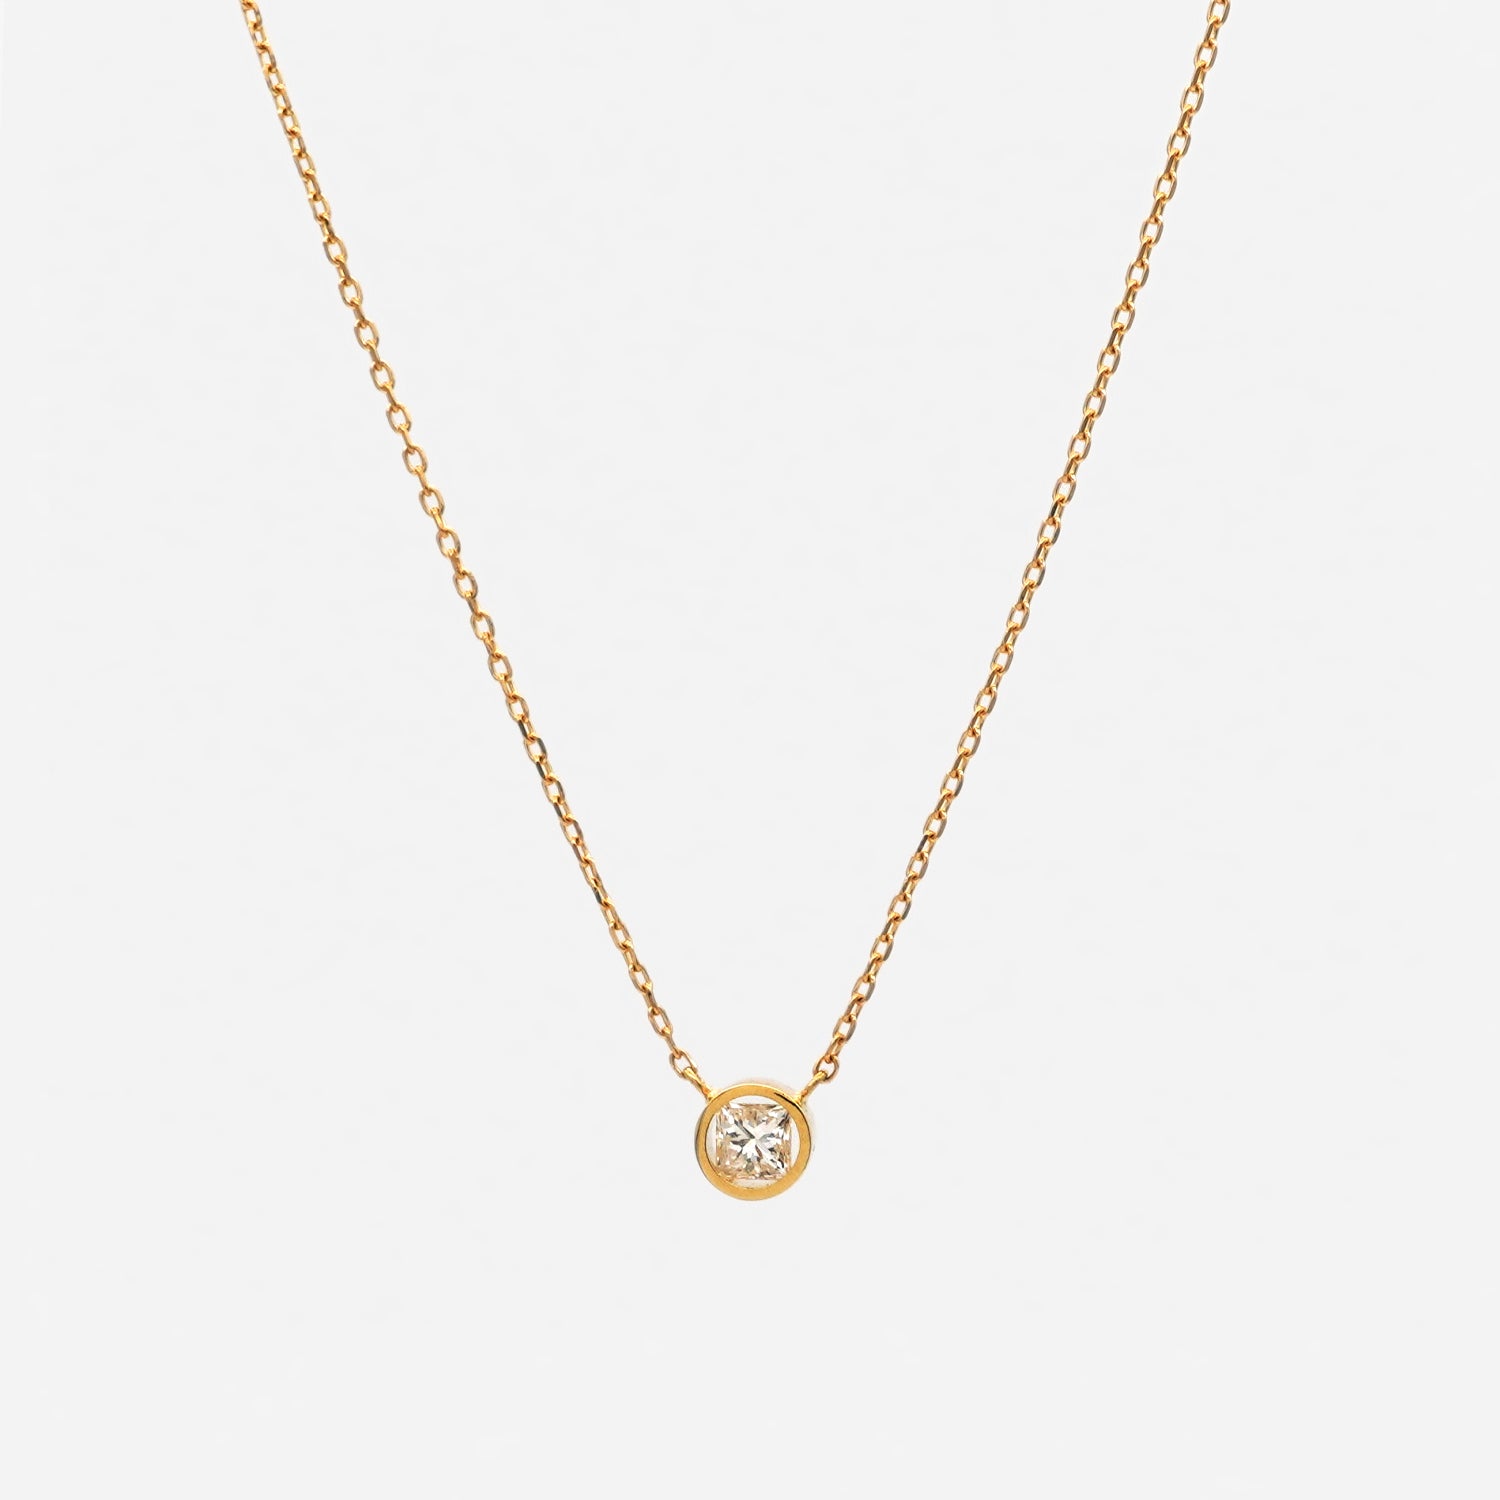 POSITION NECKLACE 0.186ct #2297